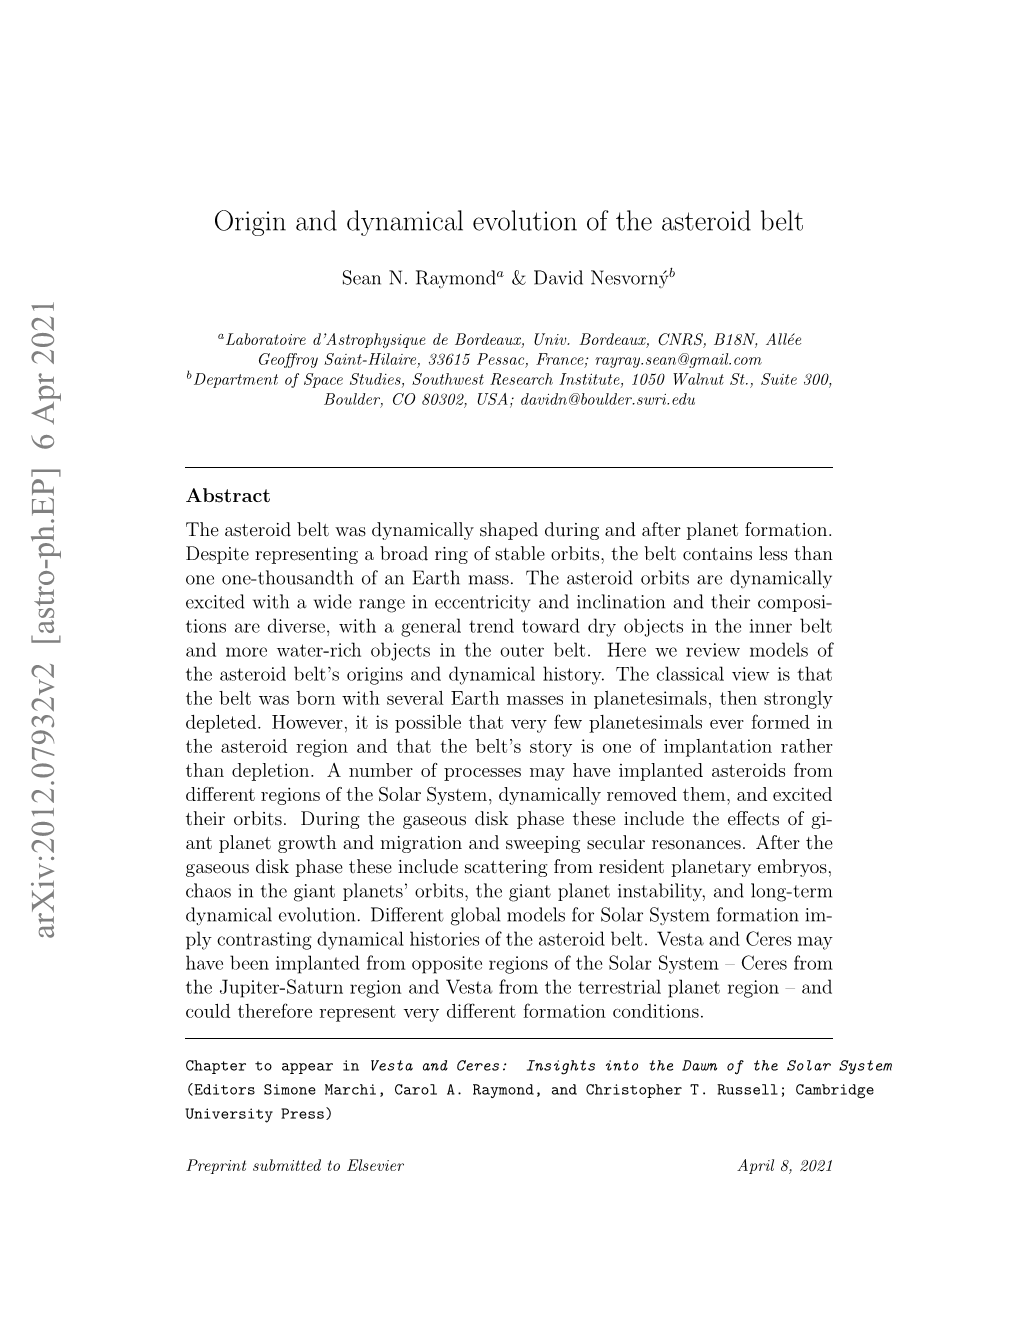 Origin and Dynamical Evolution of the Asteroid Belt